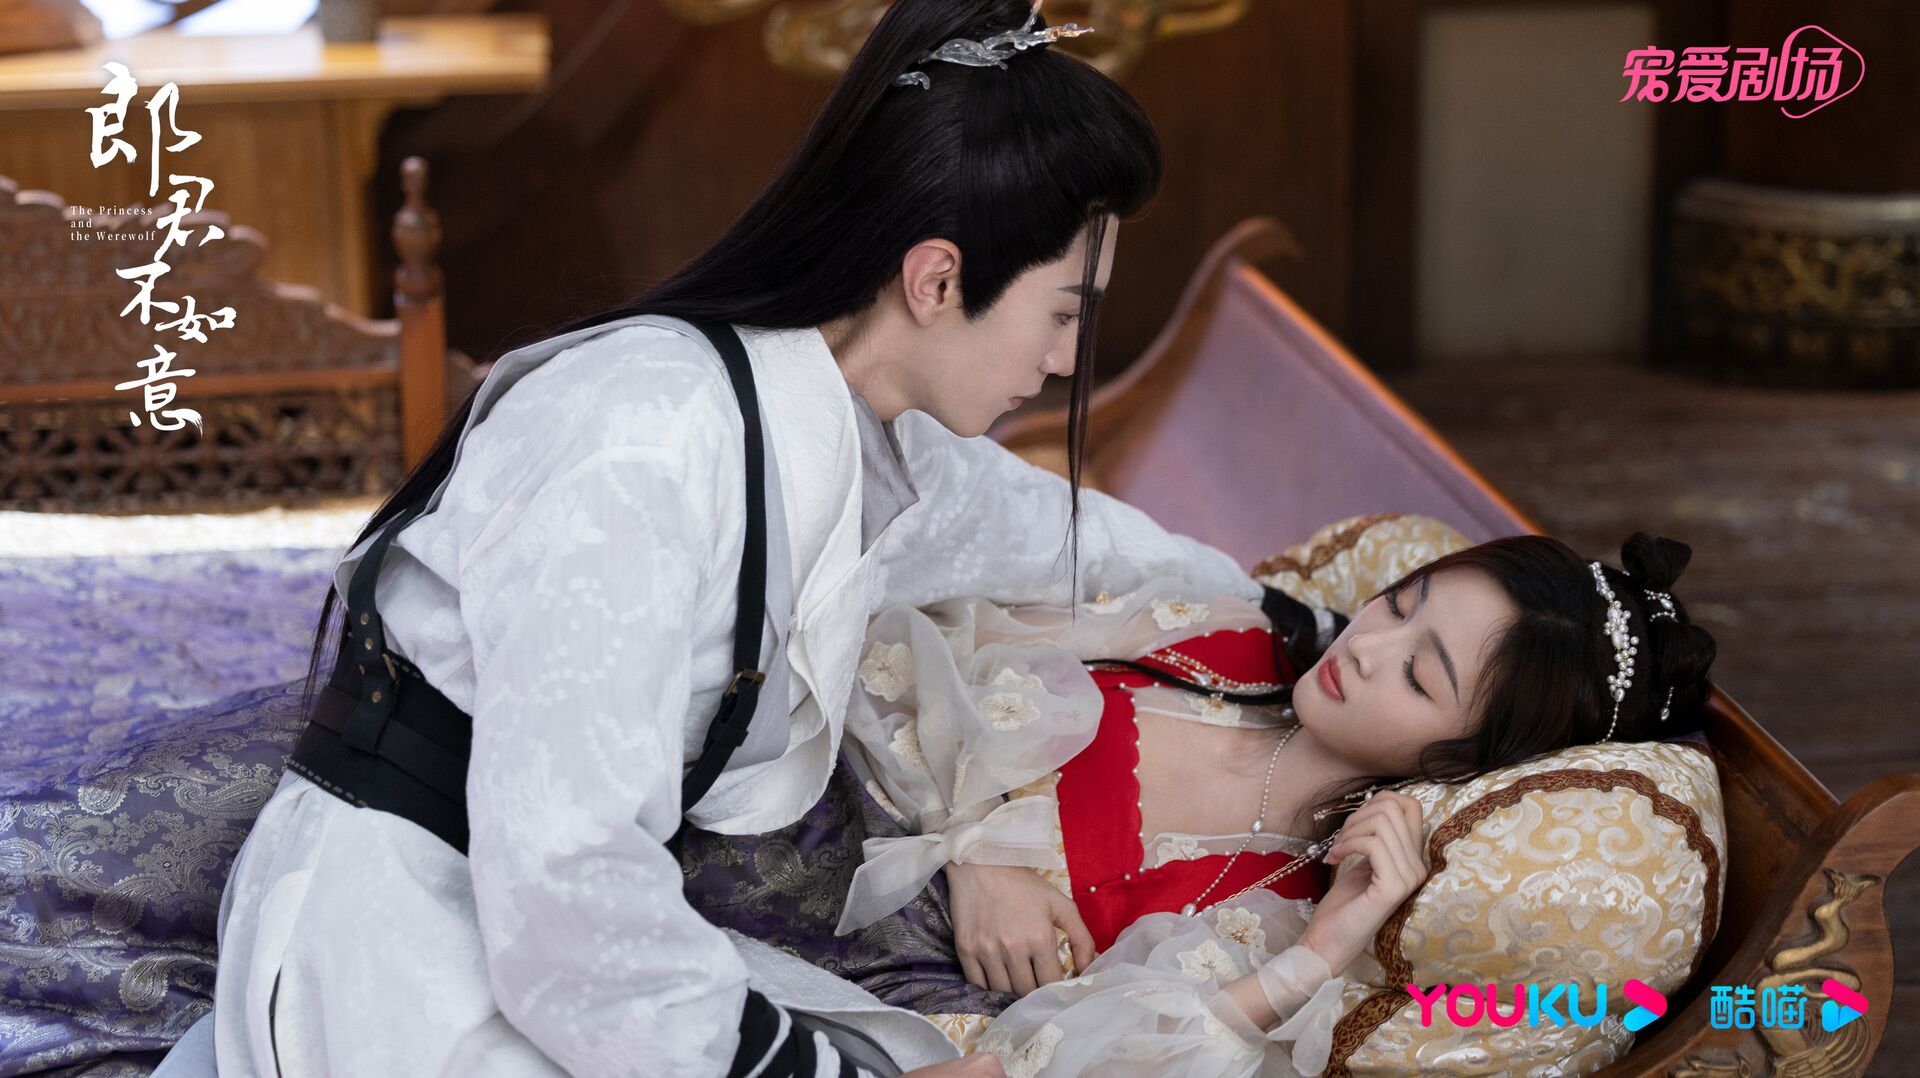 The Princess and the Werewolf with Chen Zheyuan